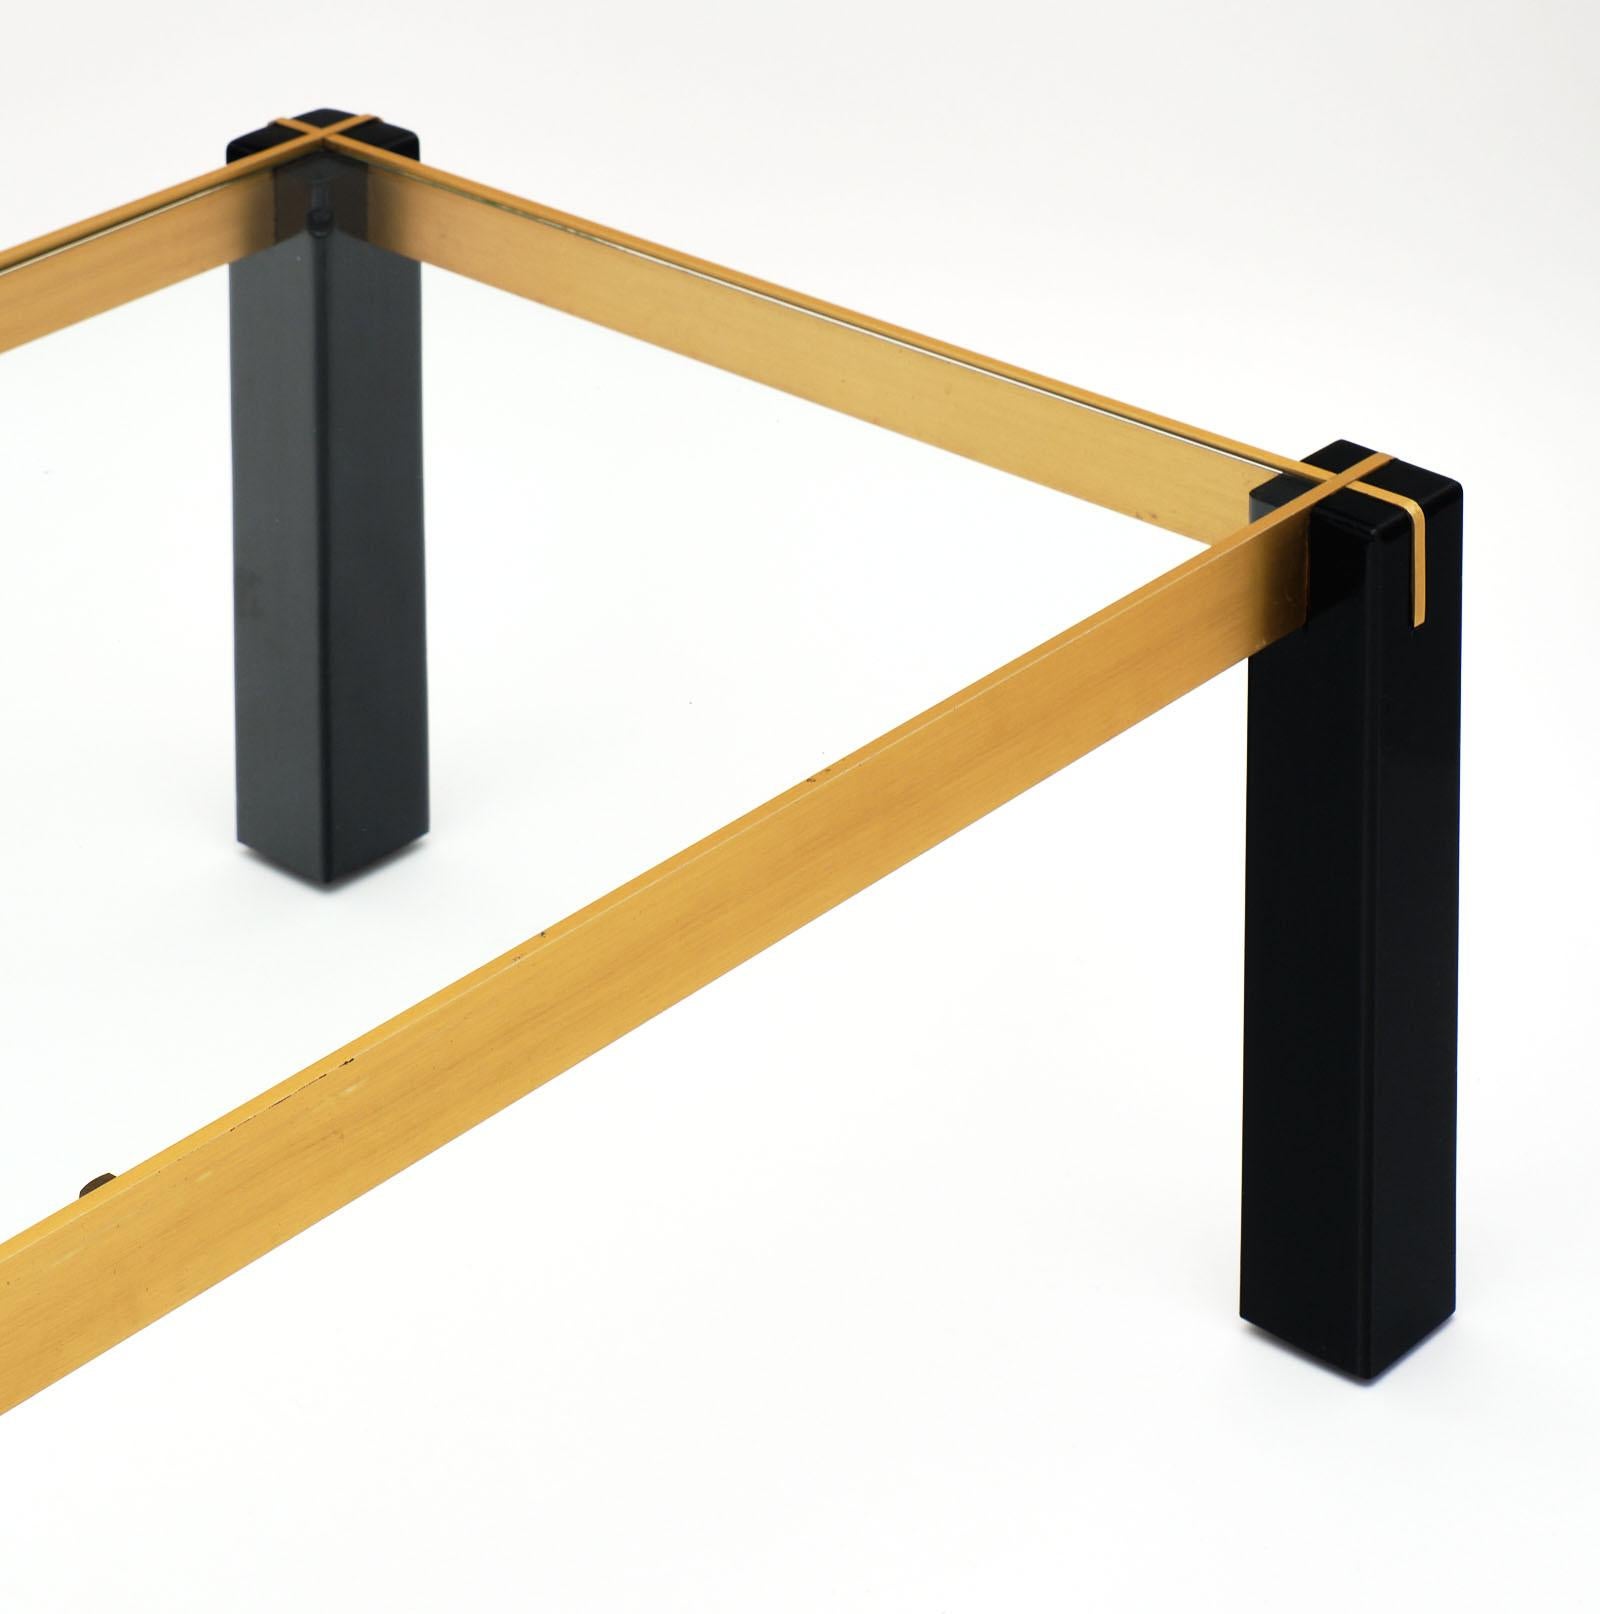 A rectangular French modernist brass and black coffee table with square section legs and clear glass, inserted on the top in the brass metal structure, which makes an x shape on each leg. We love the combination of brass with the black ebonized legs.